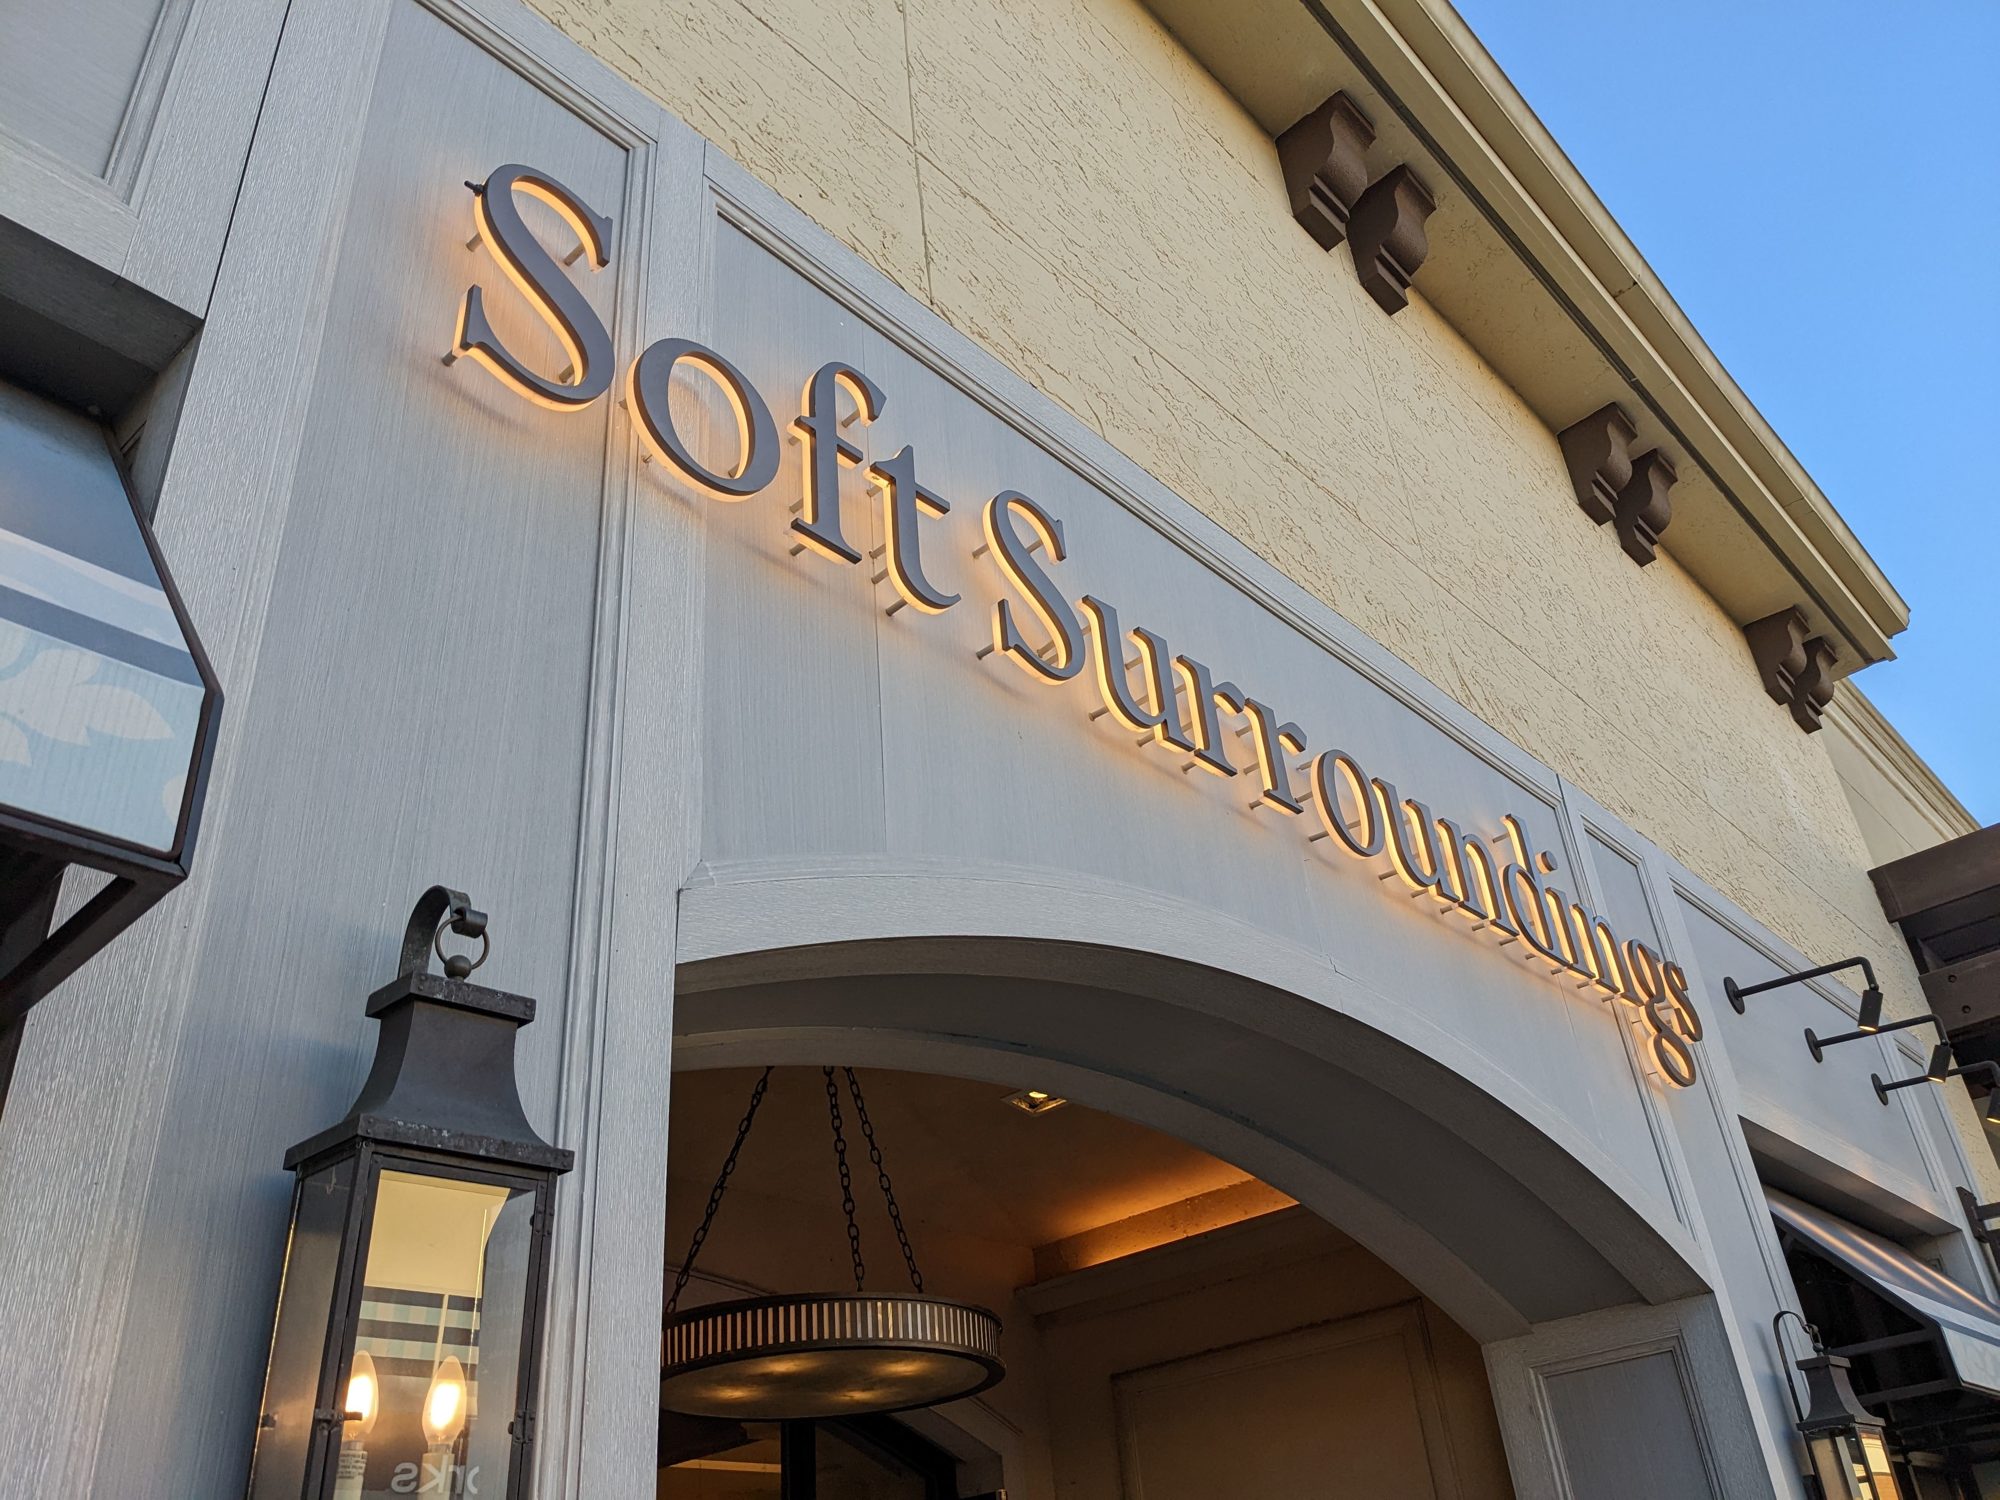 Soft Surroundings opened in St. Johns Town Center about 2018.